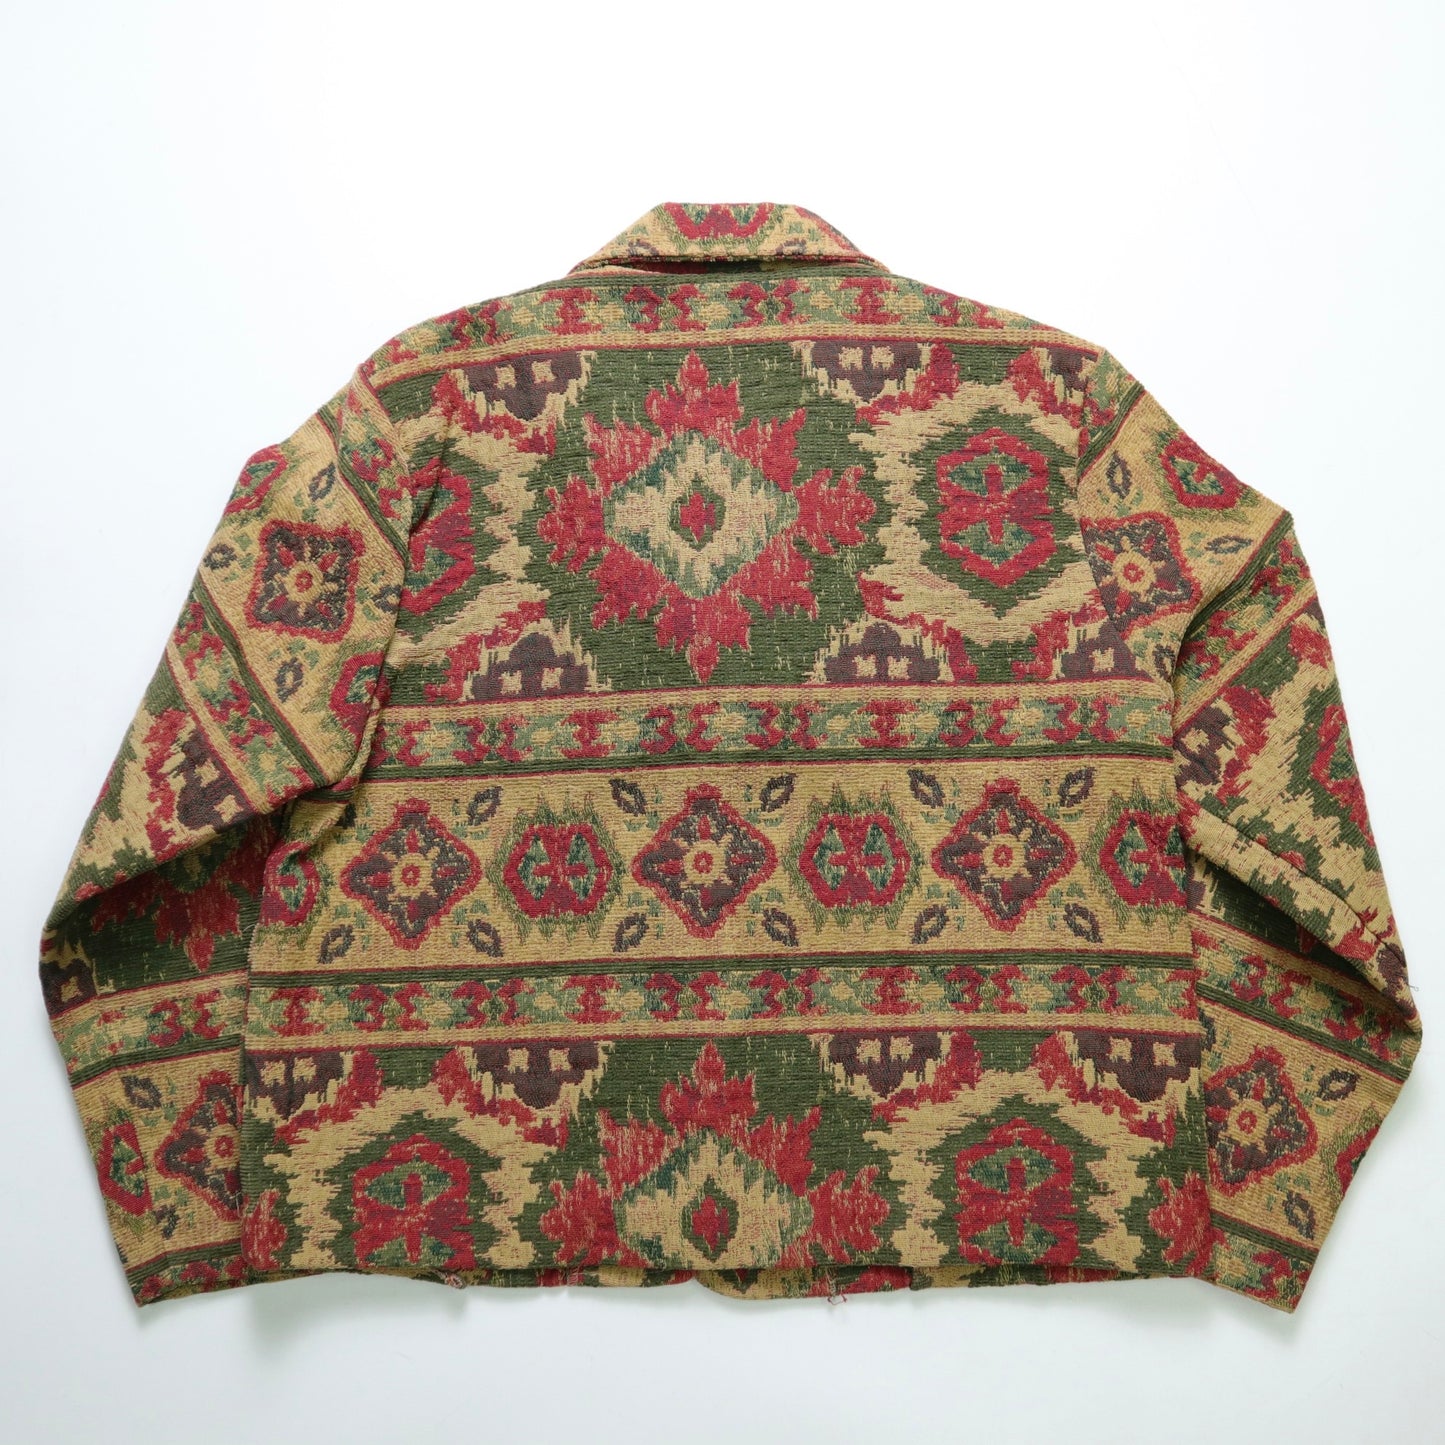 90s American-made classic totem tapestry jacket